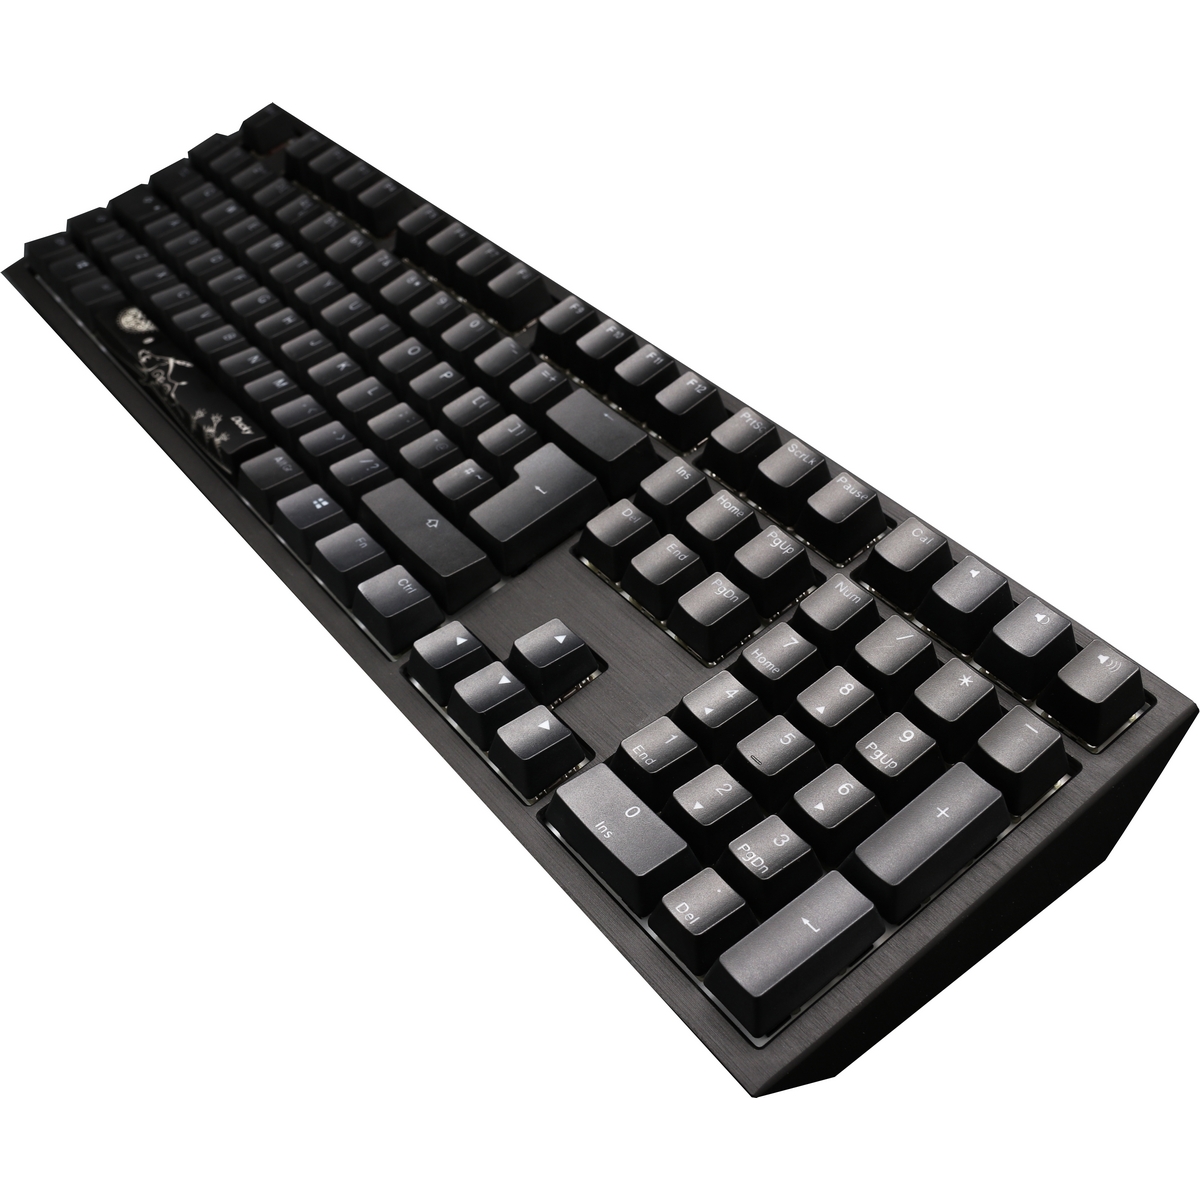 Ducky - Ducky Shine 7 Blackout USB RGB Backlit Gaming Keyboard Brown Cherry MX Switches UK Layout